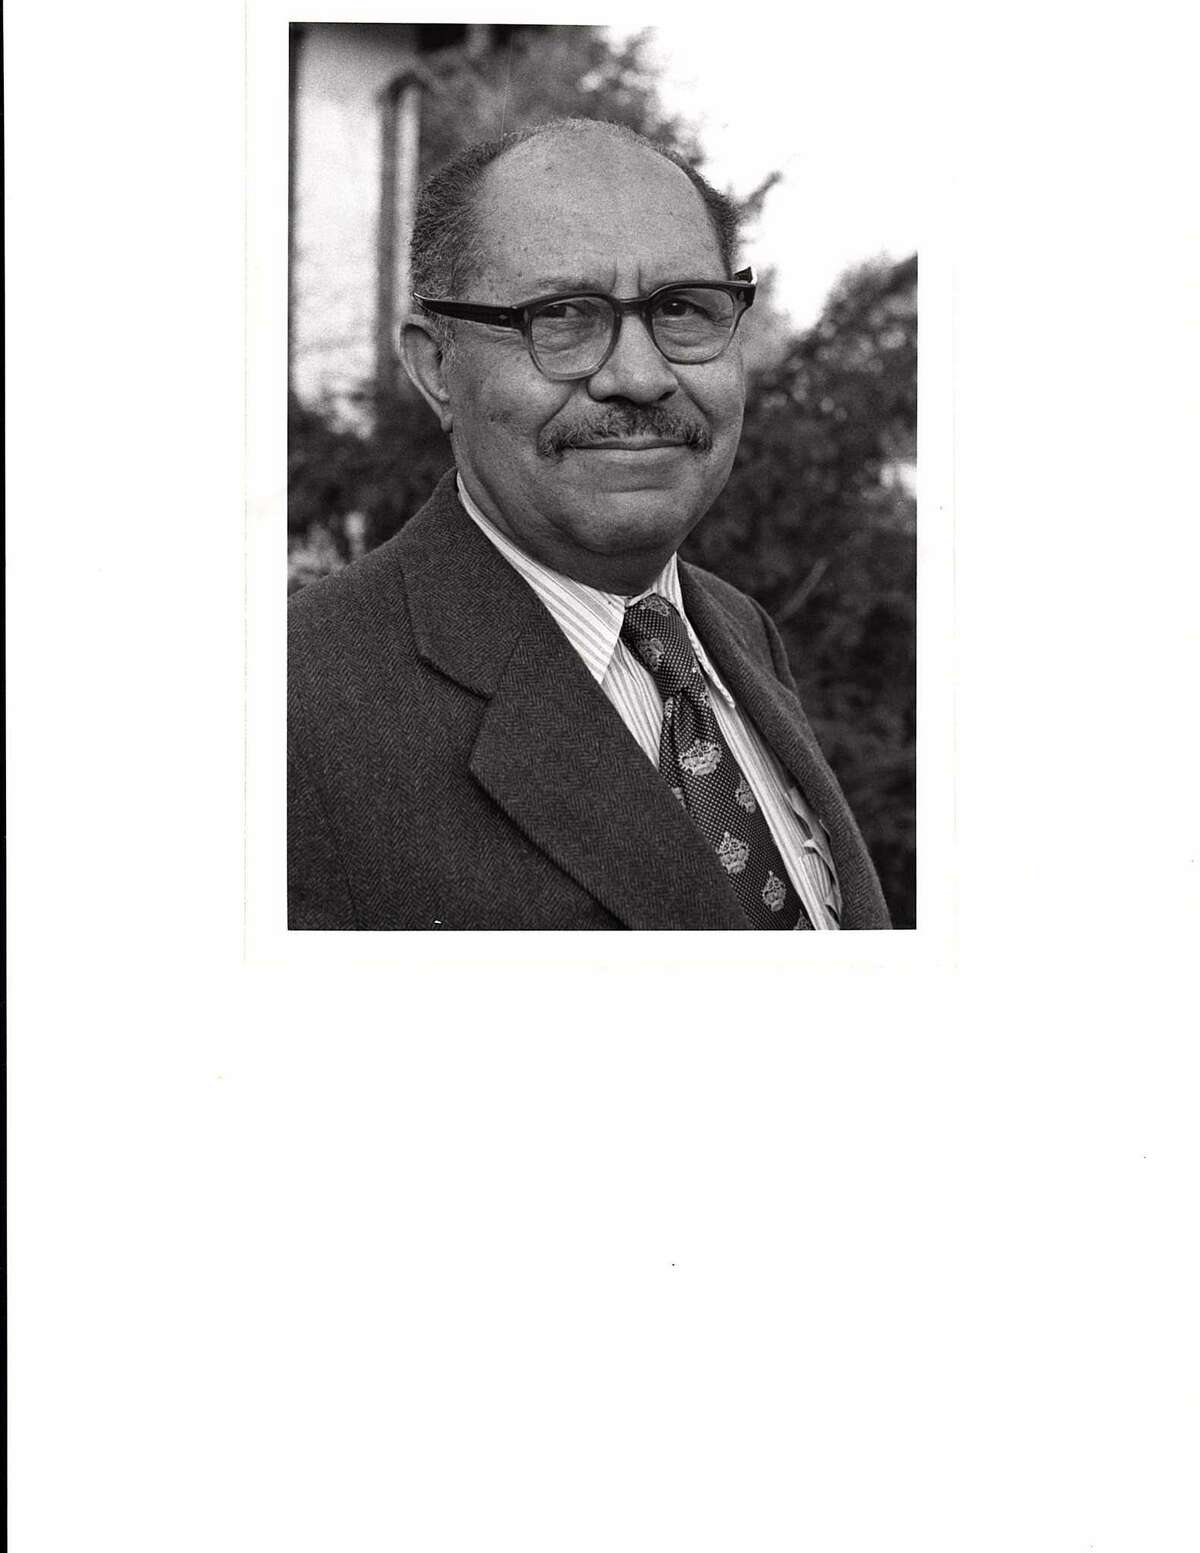 Alver Napper, a Greenwich civil-rights leader, died in 2002 at the age of 91.